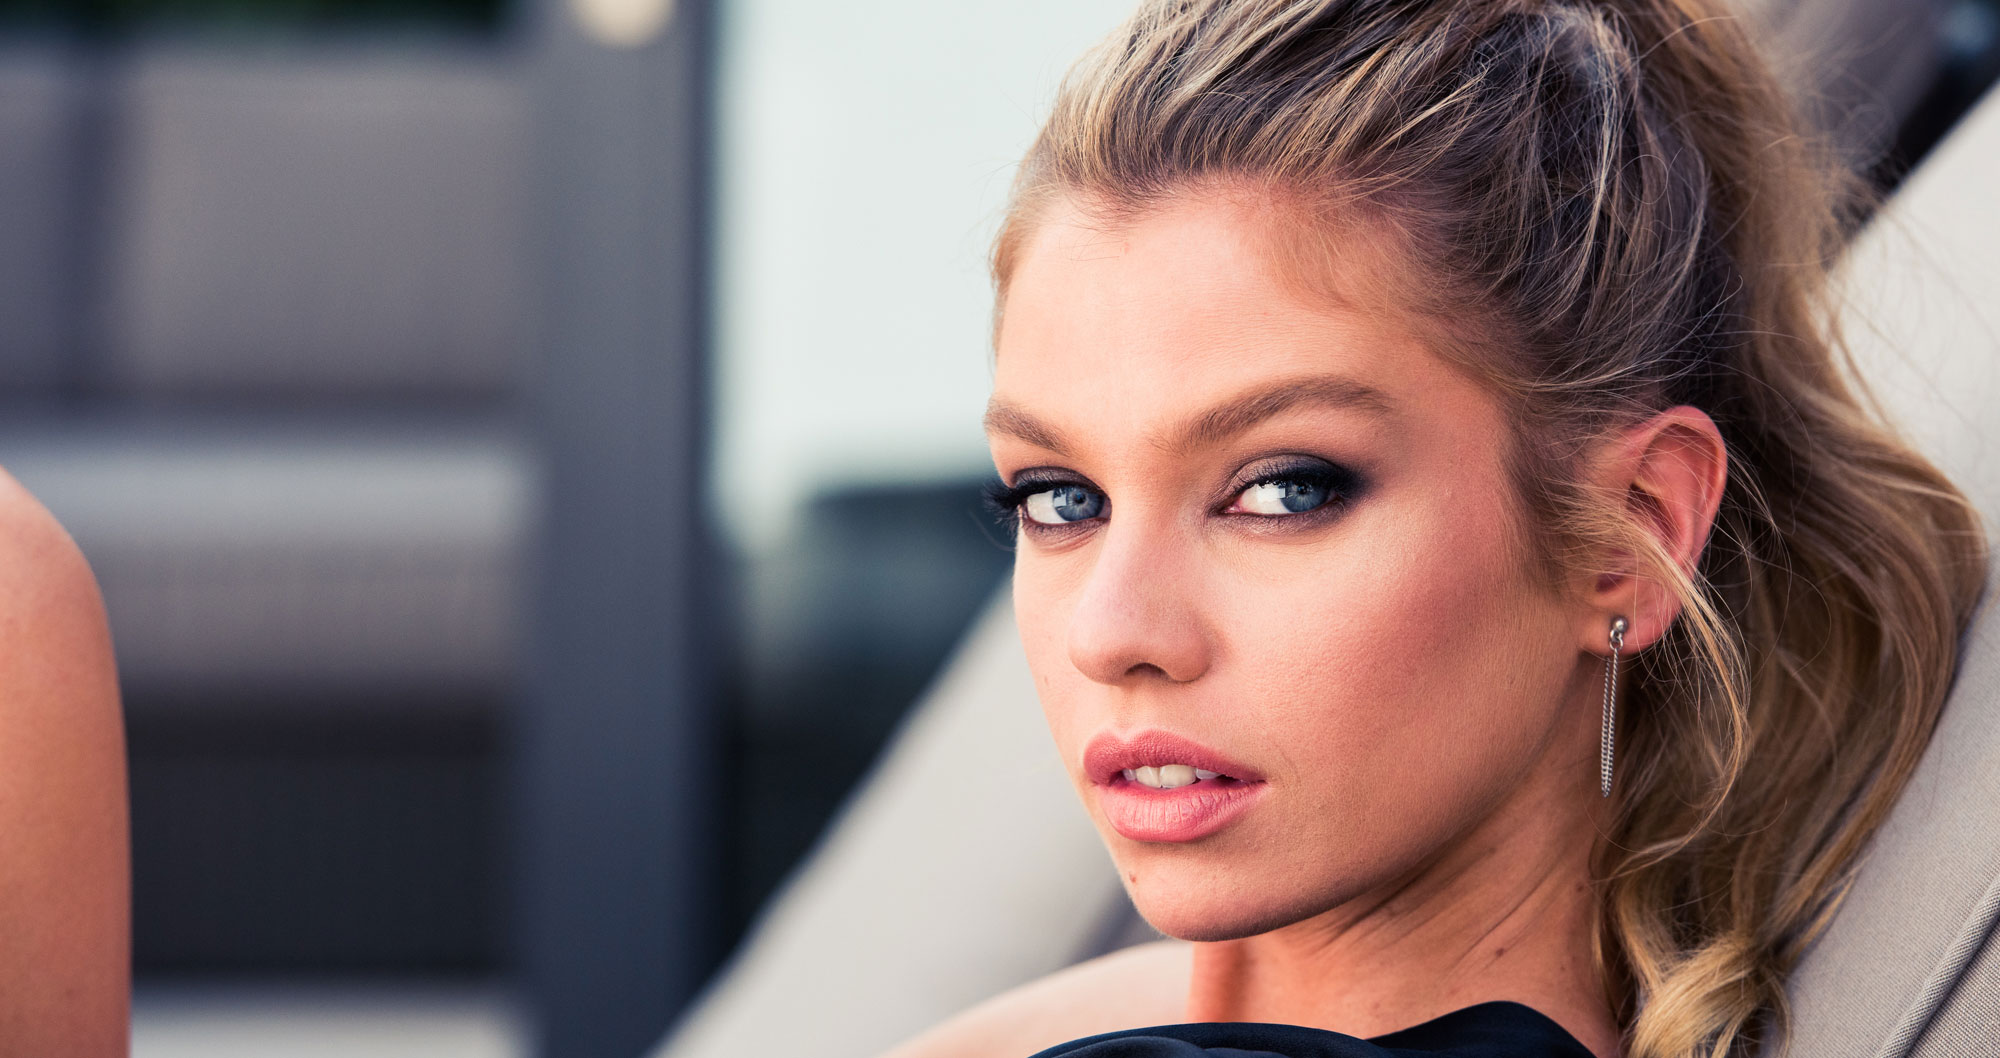 Victorias Secret Model Stella Maxwell Shares Her Morning Routine